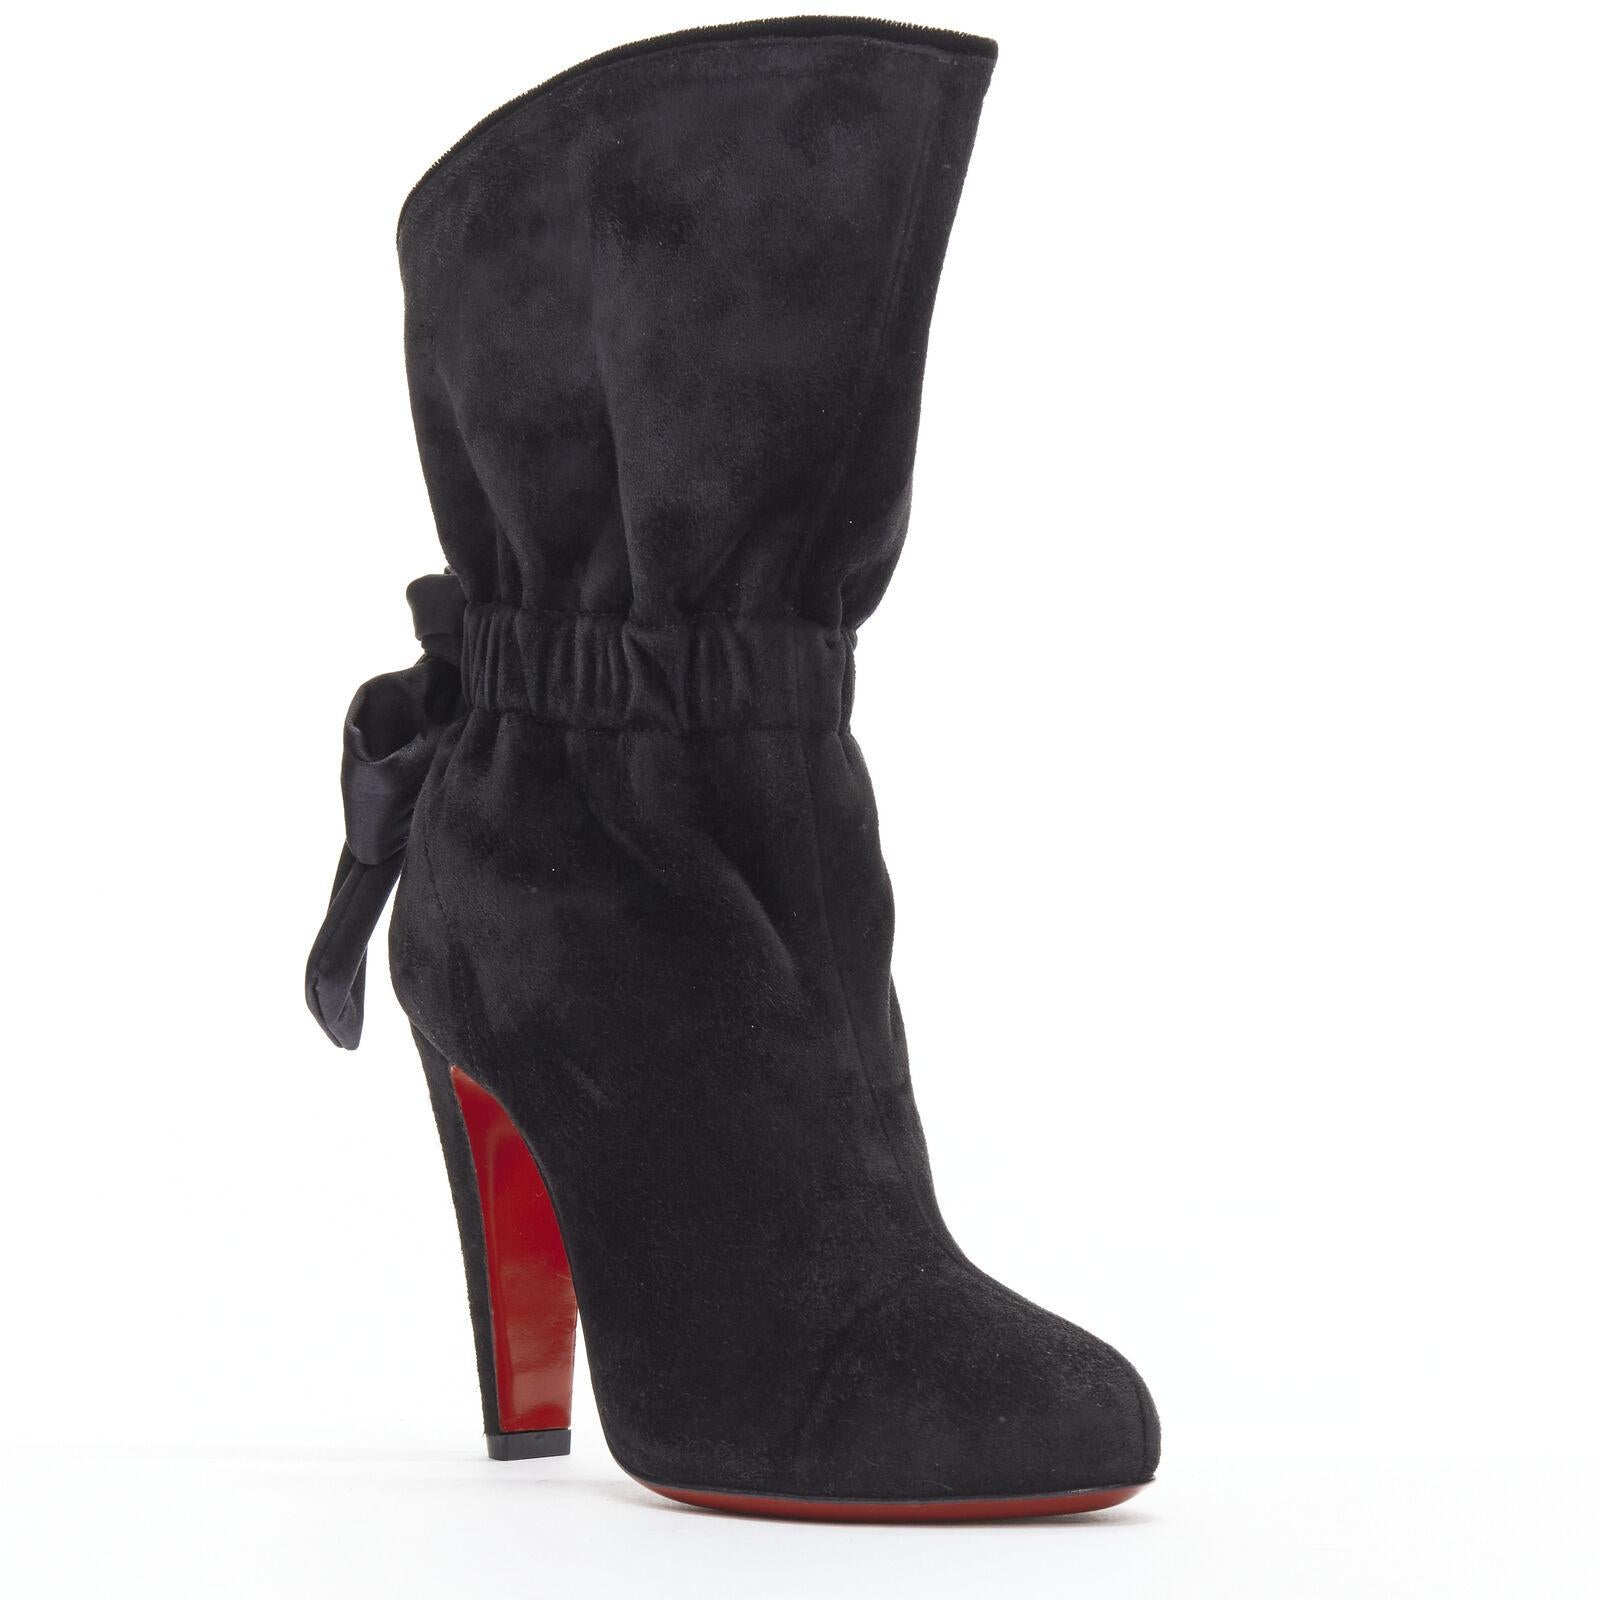 new CHRISTIAN LOUBOUTIN Kristofa 100 black bow suede slouchy heel boots EU36
Reference: TGAS/C01479
Brand: Christian Louboutin
Model: Kristofa 100
Material: Suede, Velvet
Color: Black
Pattern: Solid
Closure: Elasticated
Lining: Leather
Extra